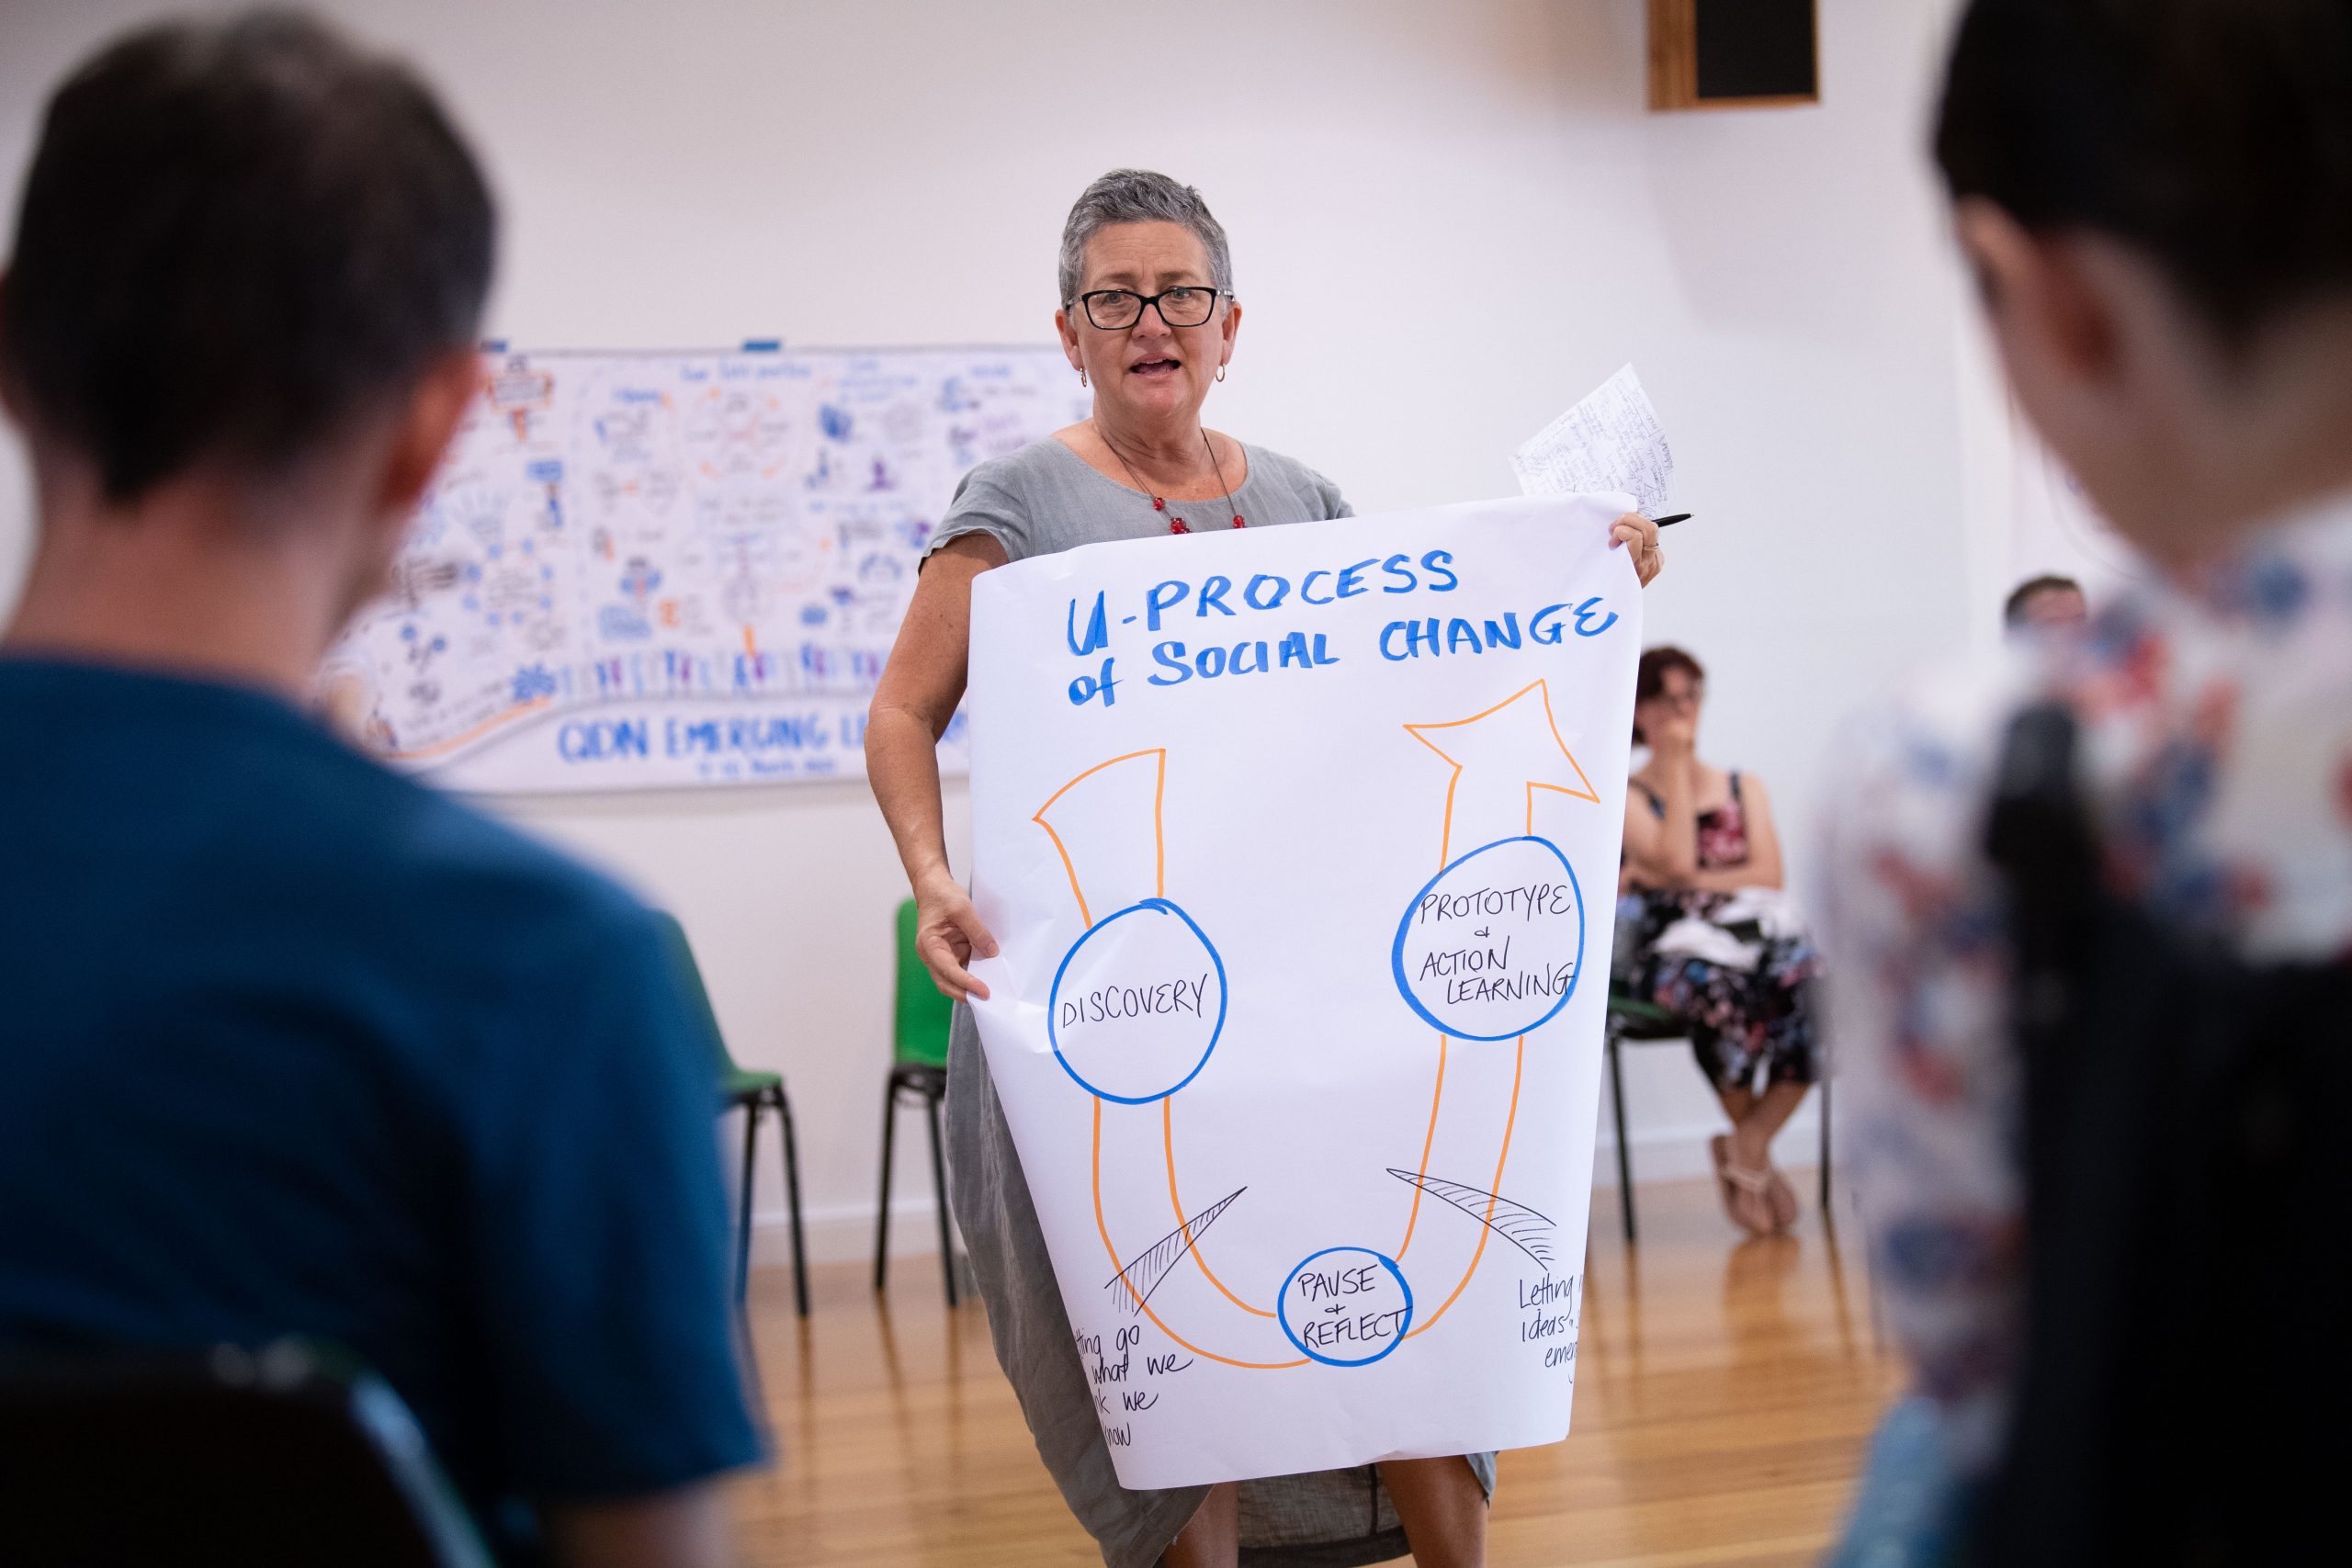 The backs of two people are blurred, with a woman presenting in the middle of a circle of people in focus. She is holding up a large poster with an explanation of a U Process.